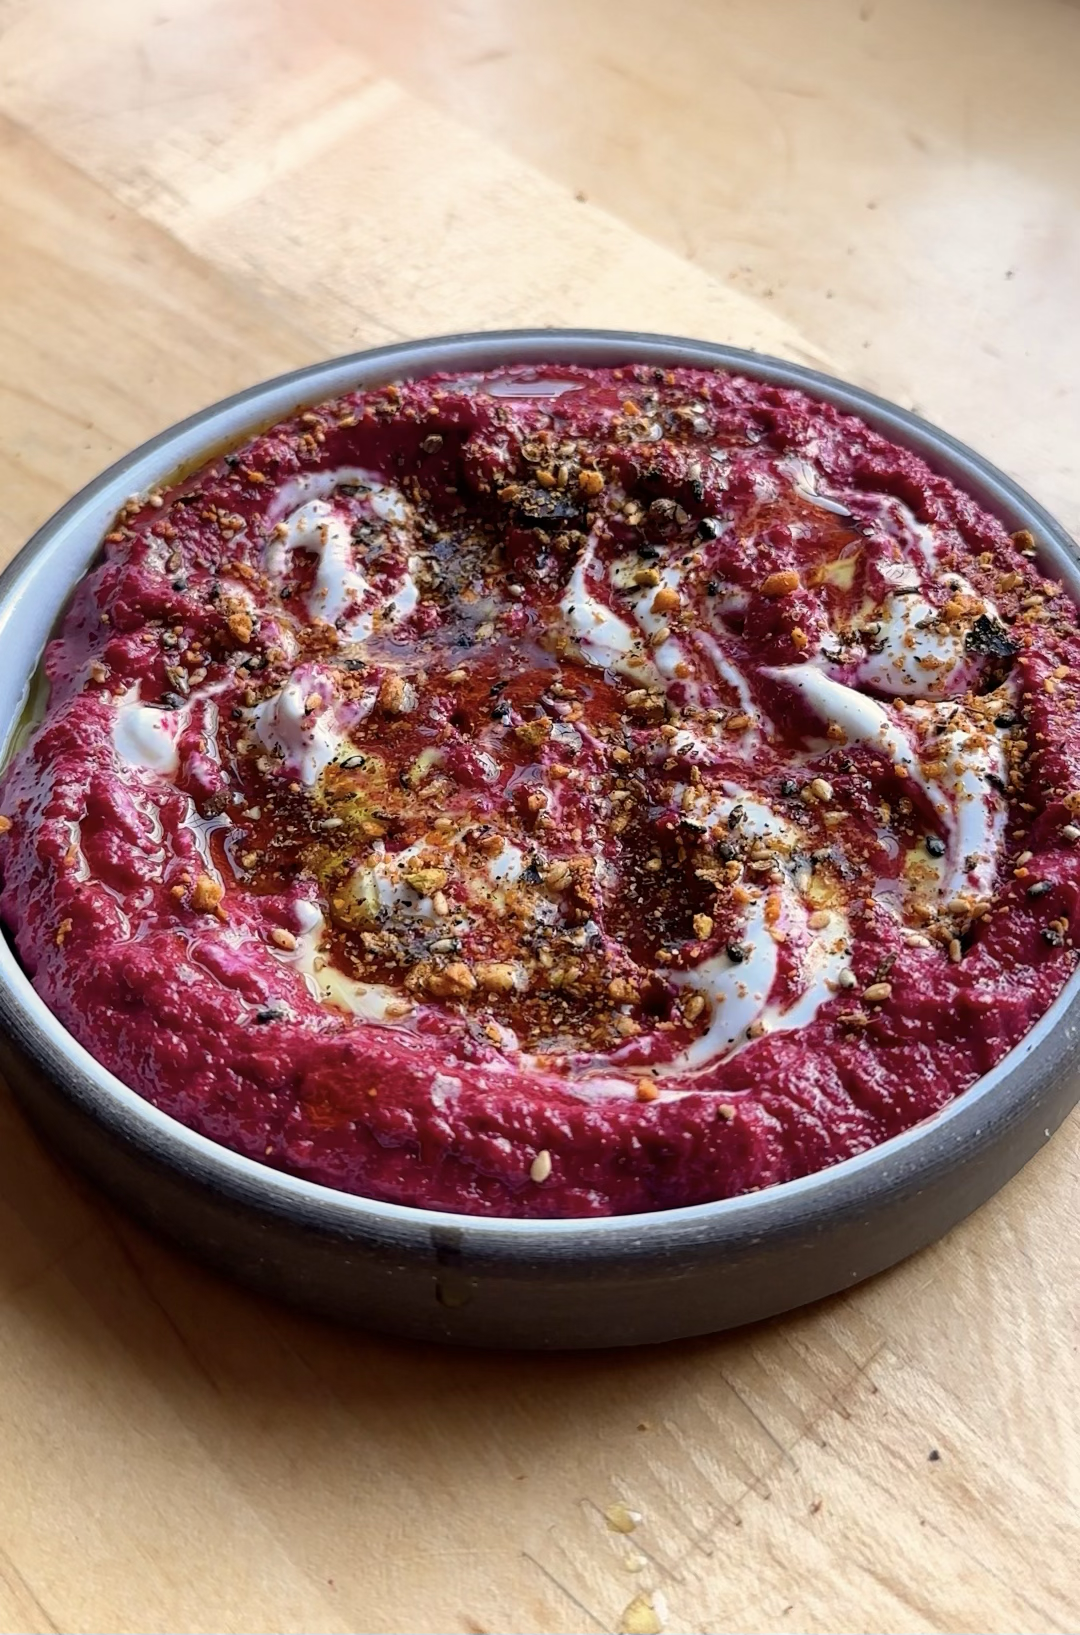 Picture for Spicy Beet-Labaneh Dip